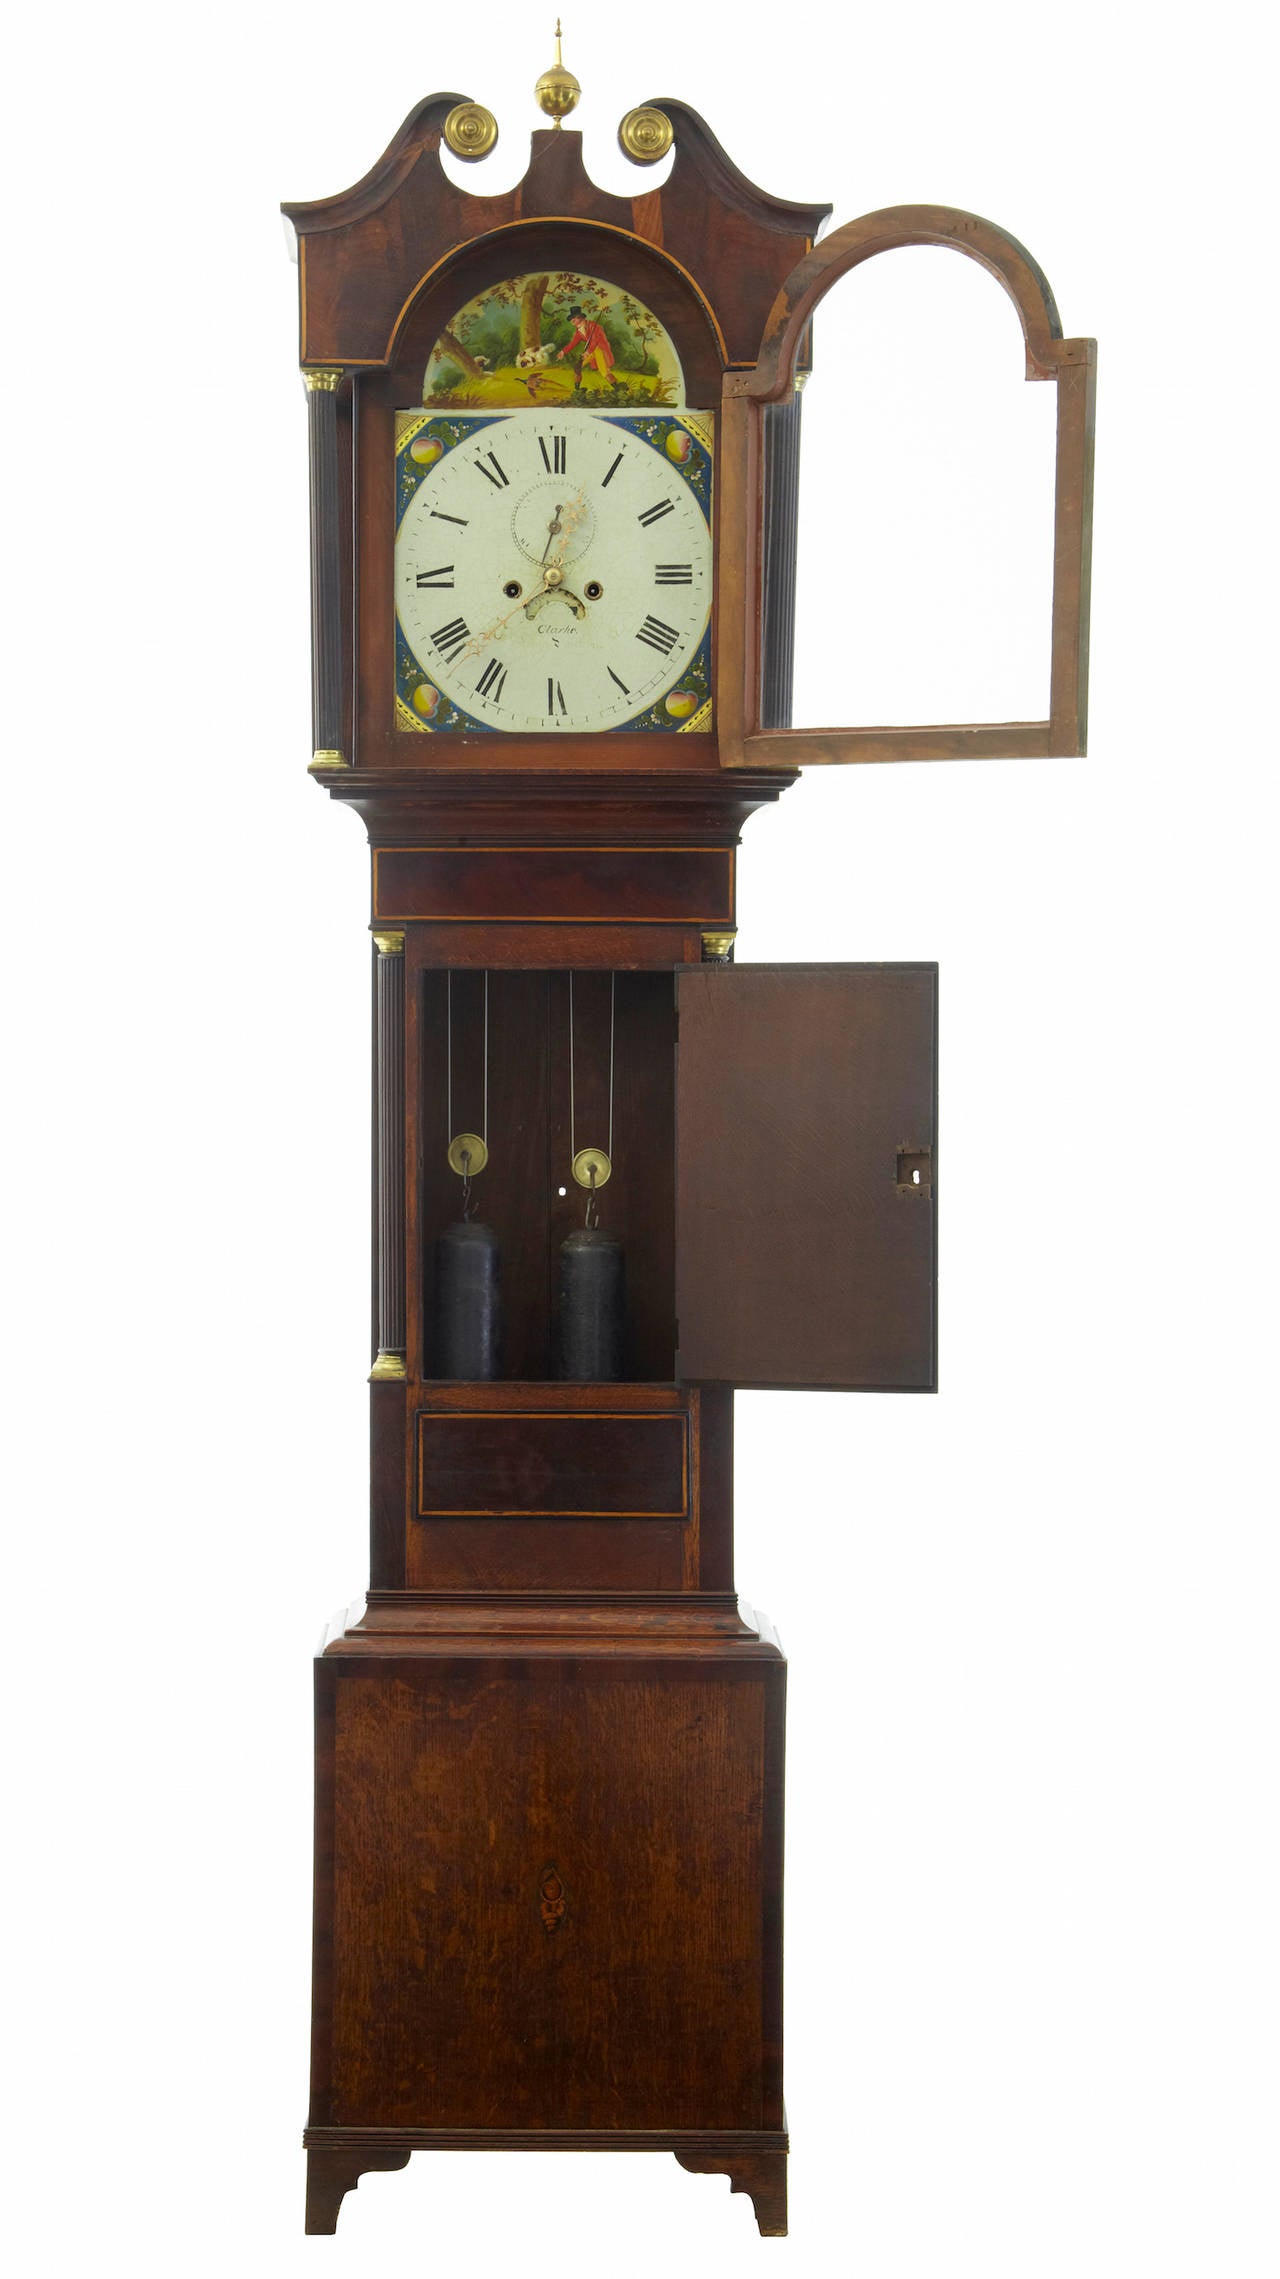 Mahogany and oak longcase clock circa 1850.
Inlaid with shells to the door and base.
Mahogany strung with satinwood.
Painted clock face depicts a pheasant hunt scene and is signed clarke.
Fully working and professionally restored.
Restorations